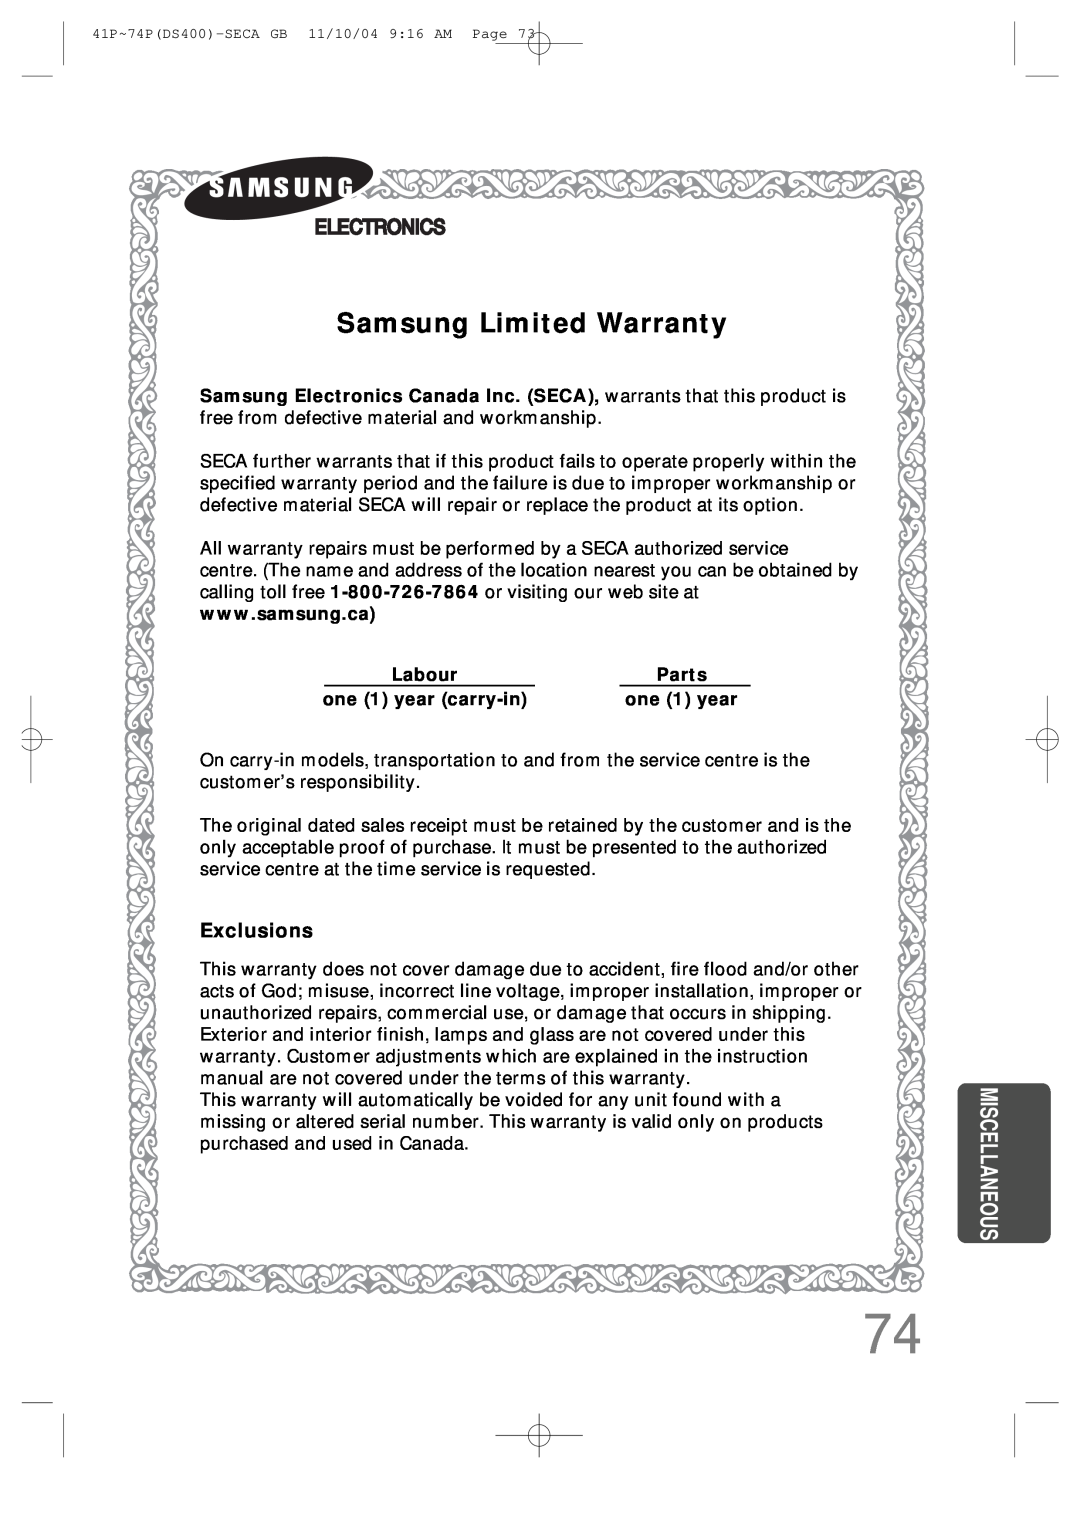 Samsung HT-DS400 instruction manual Samsung Limited Warranty, Exclusions, Labour, Parts, one 1 year carry-in, Miscellaneous 